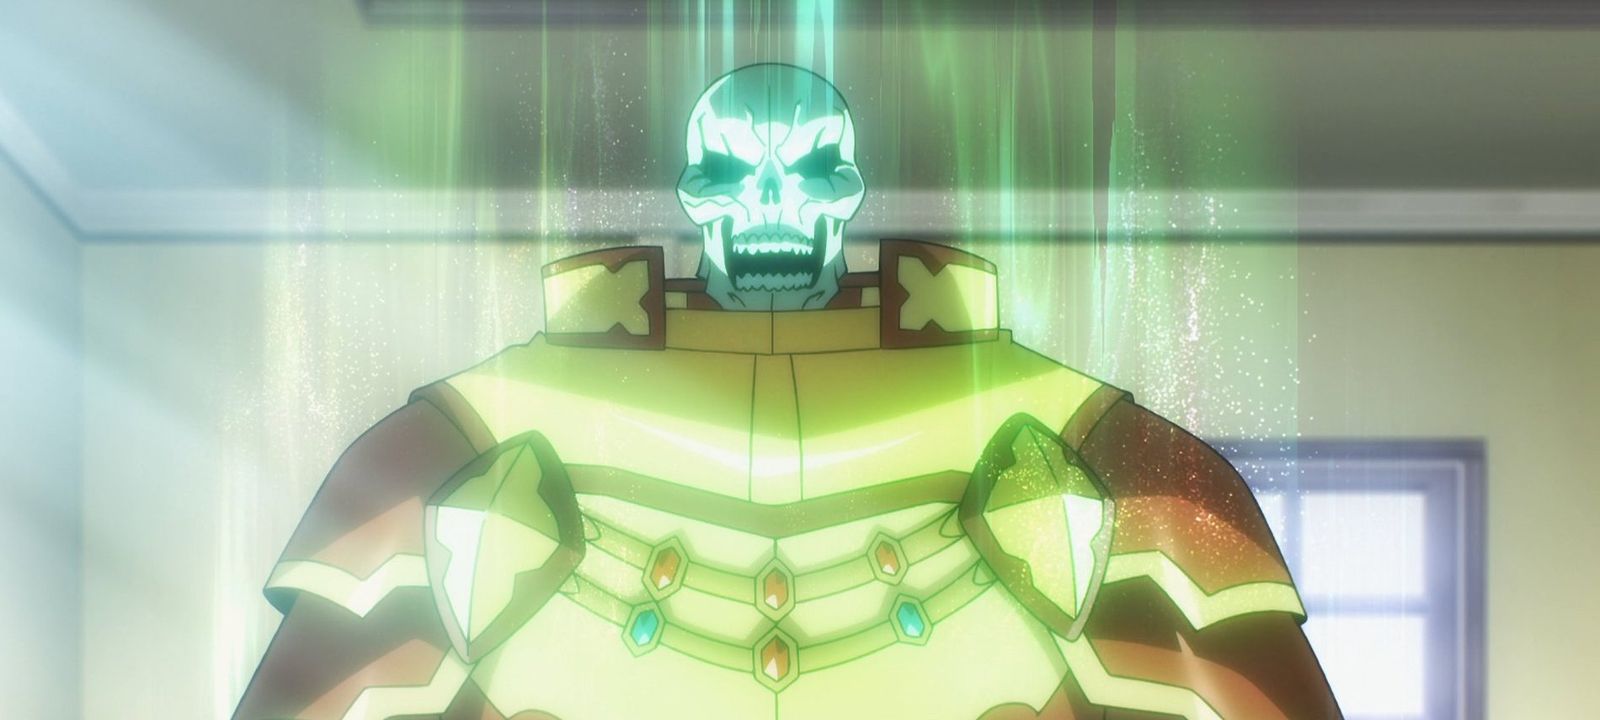 Why Does Ainz Glow Green in Overlord Is the Green Glow a Debuff